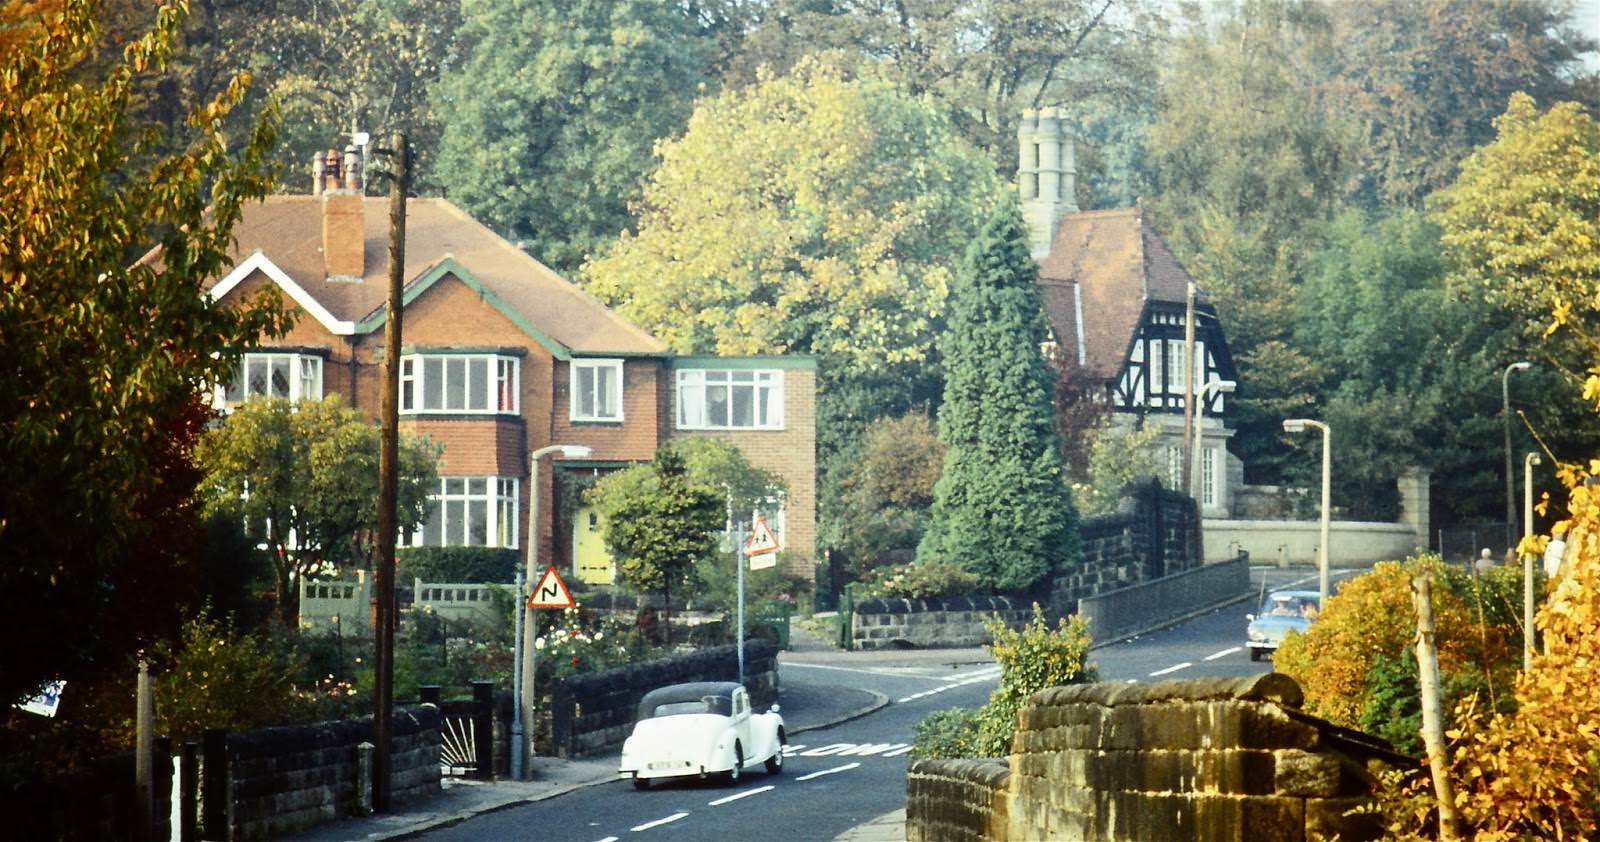 The leafy suburbs. Probably near Weetwood Lane, What is that wonderful white car?